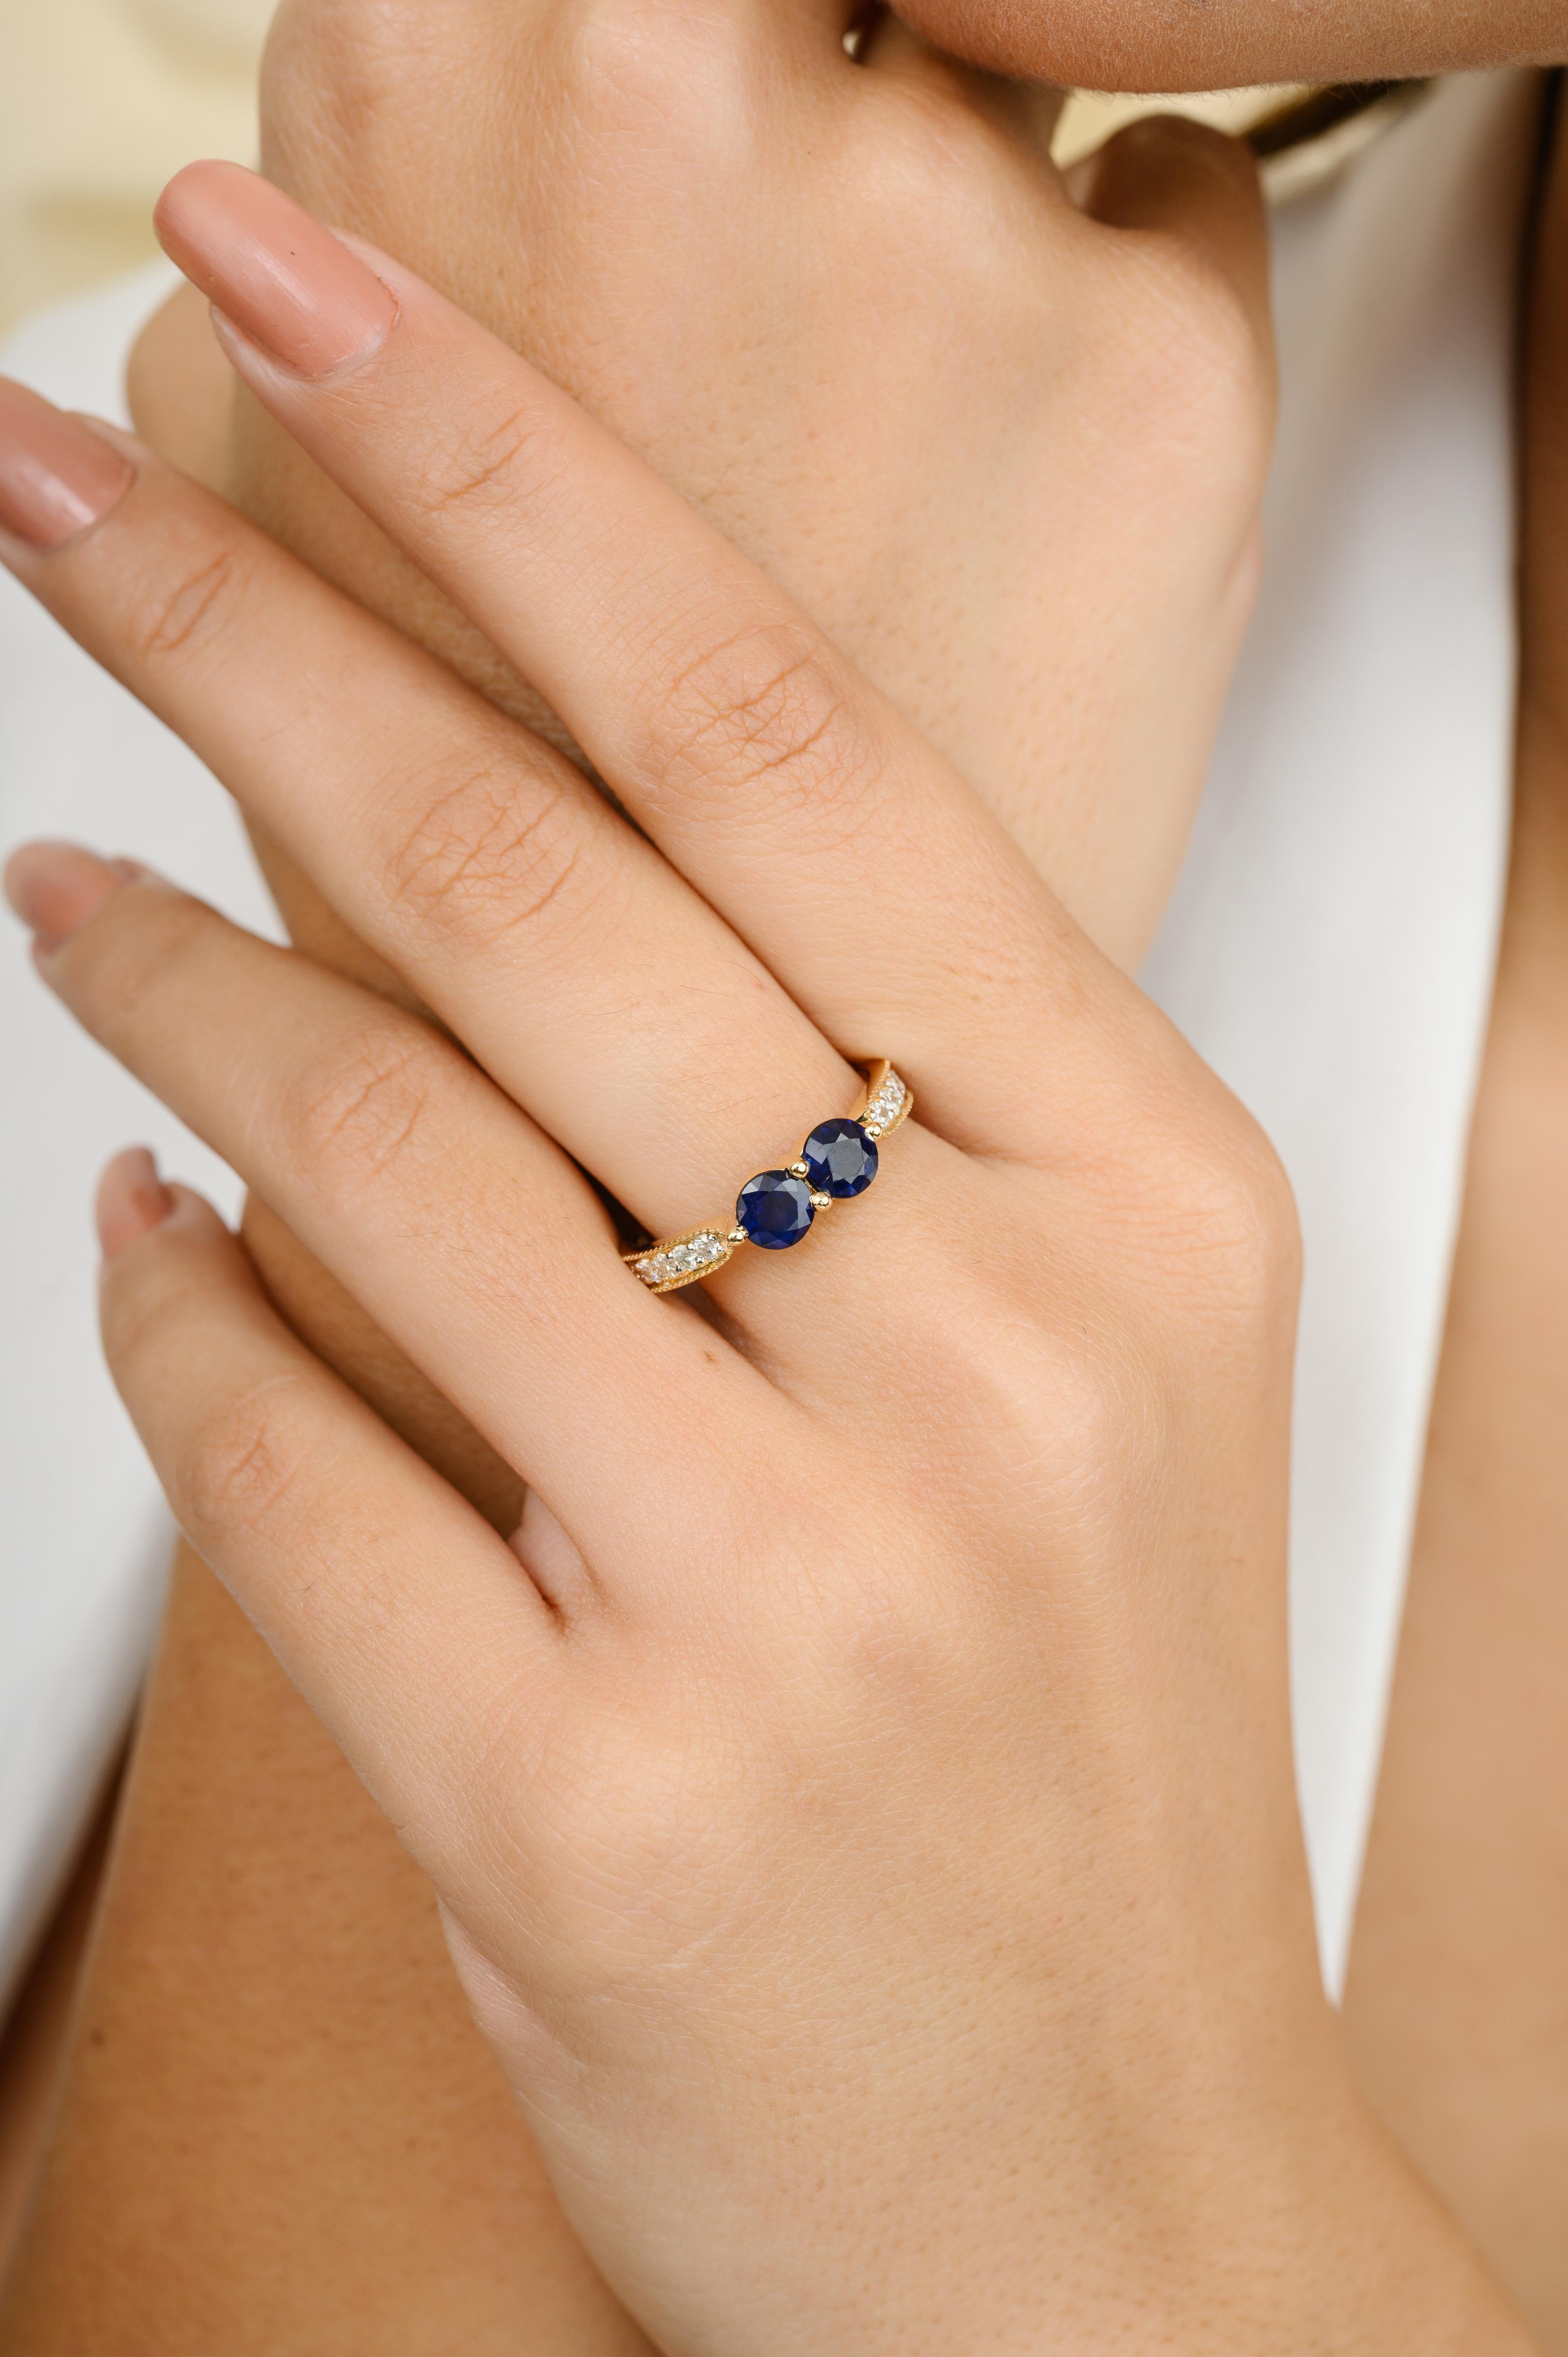 For Sale:  18k Solid Yellow Gold Two Stone Blue Sapphire Diamond Ring Wedding Gift for Her 6